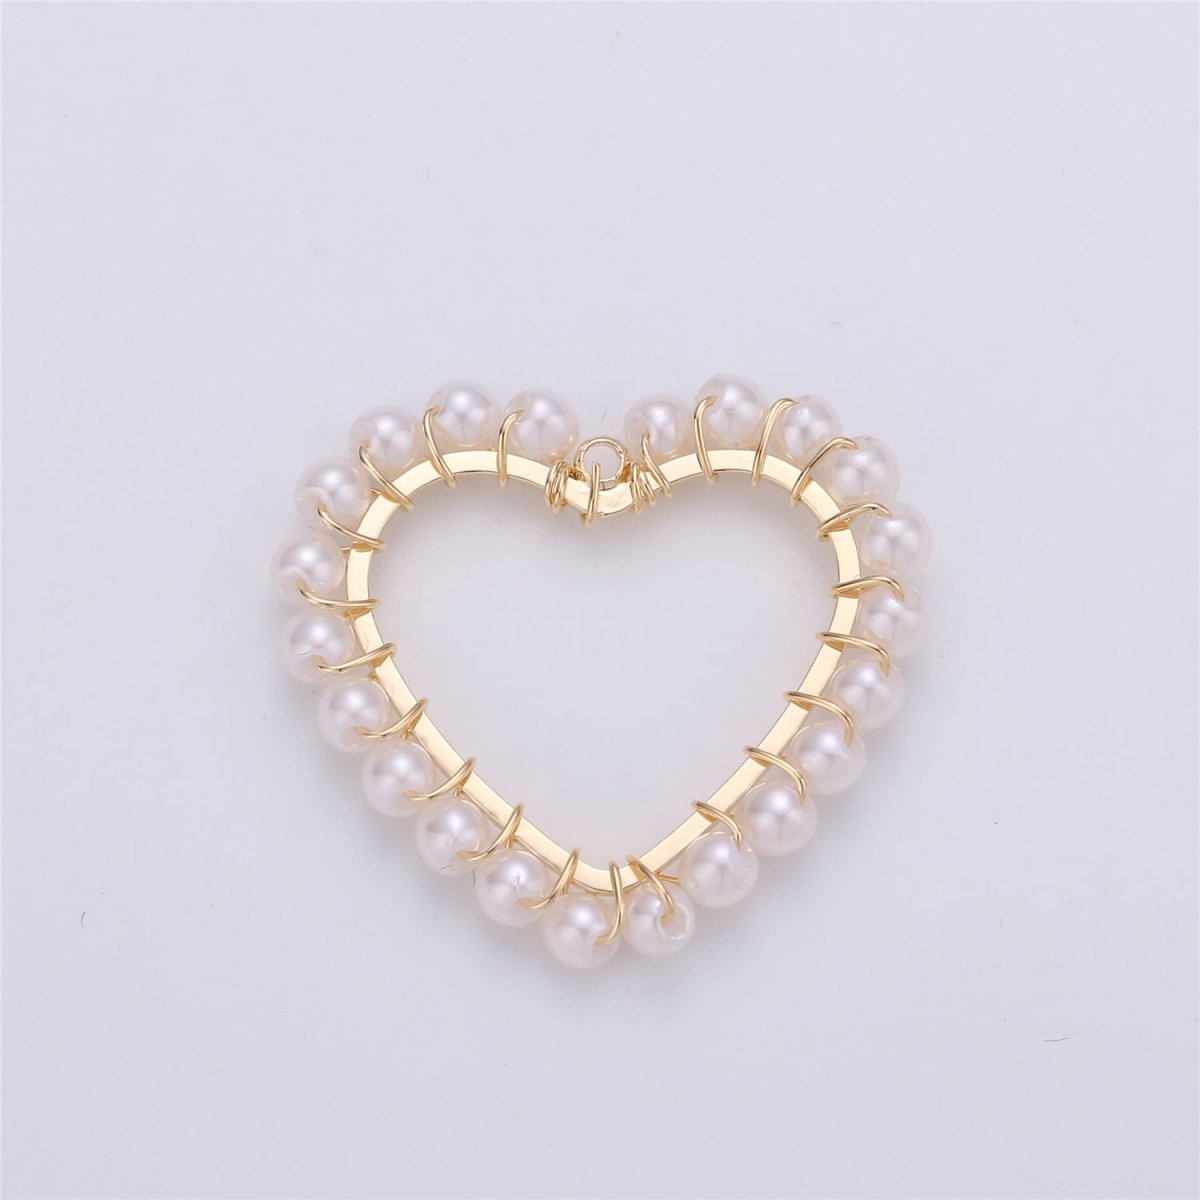 On Sale! CLEARANCE! 1pc Heart Shell Powder Pearl Charm Pendant with 18k Light Gold Plated Edge for Necklace Anklet Bracelet Earring Charm Supplies 27mmx27mm E-516 - DLUXCA